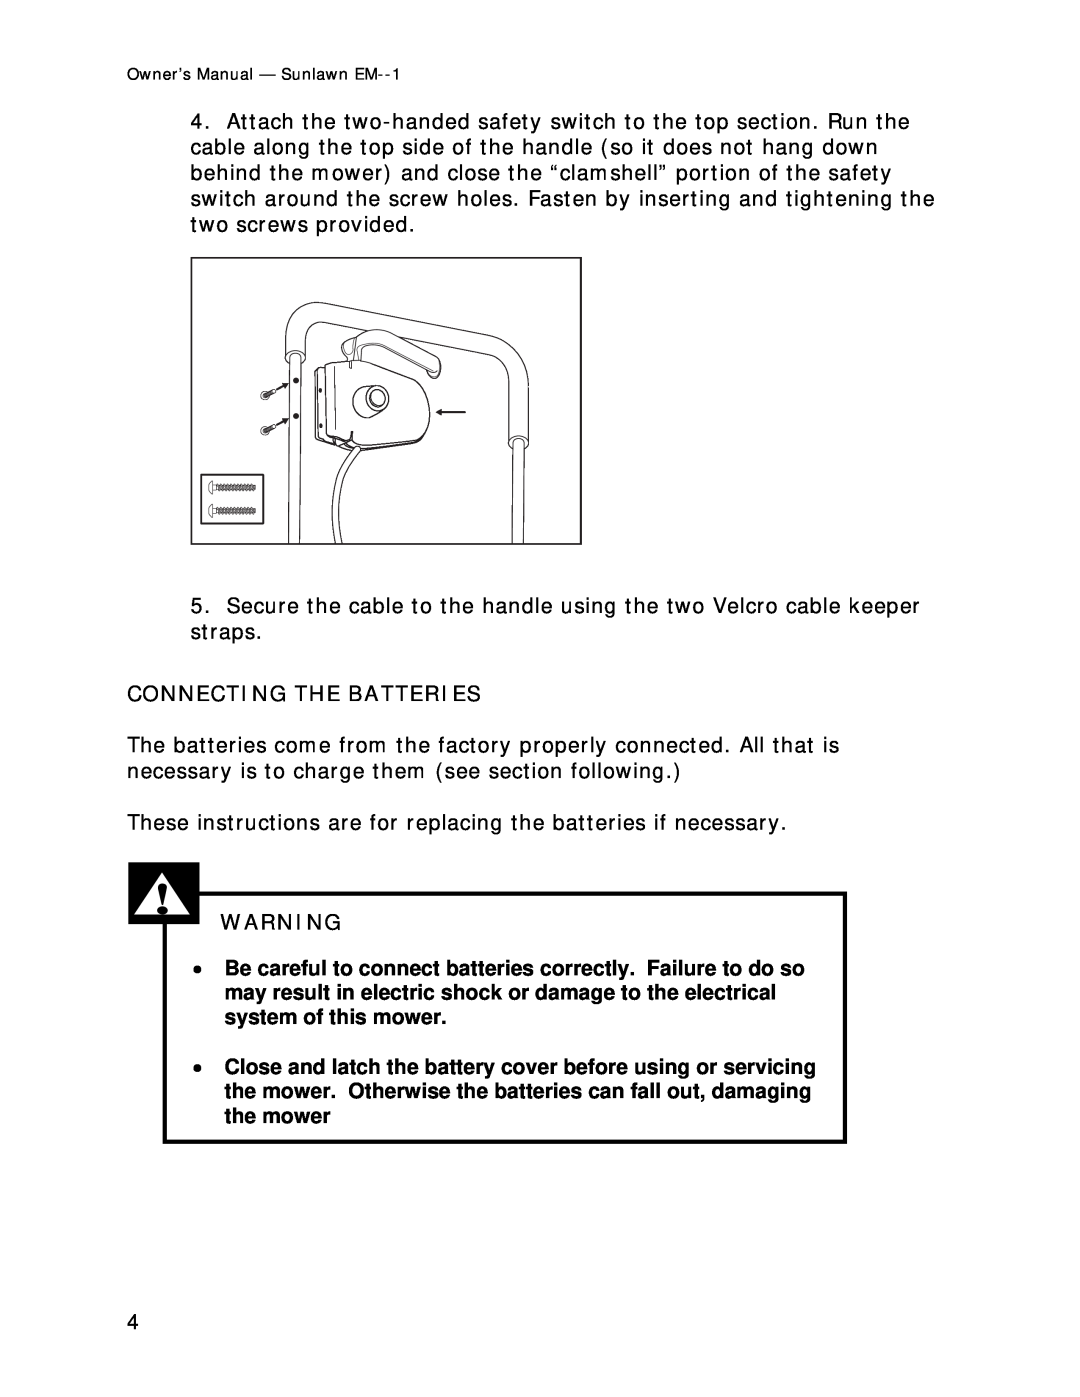 Sun Lawn EM-1 owner manual Connecting The Batteries 